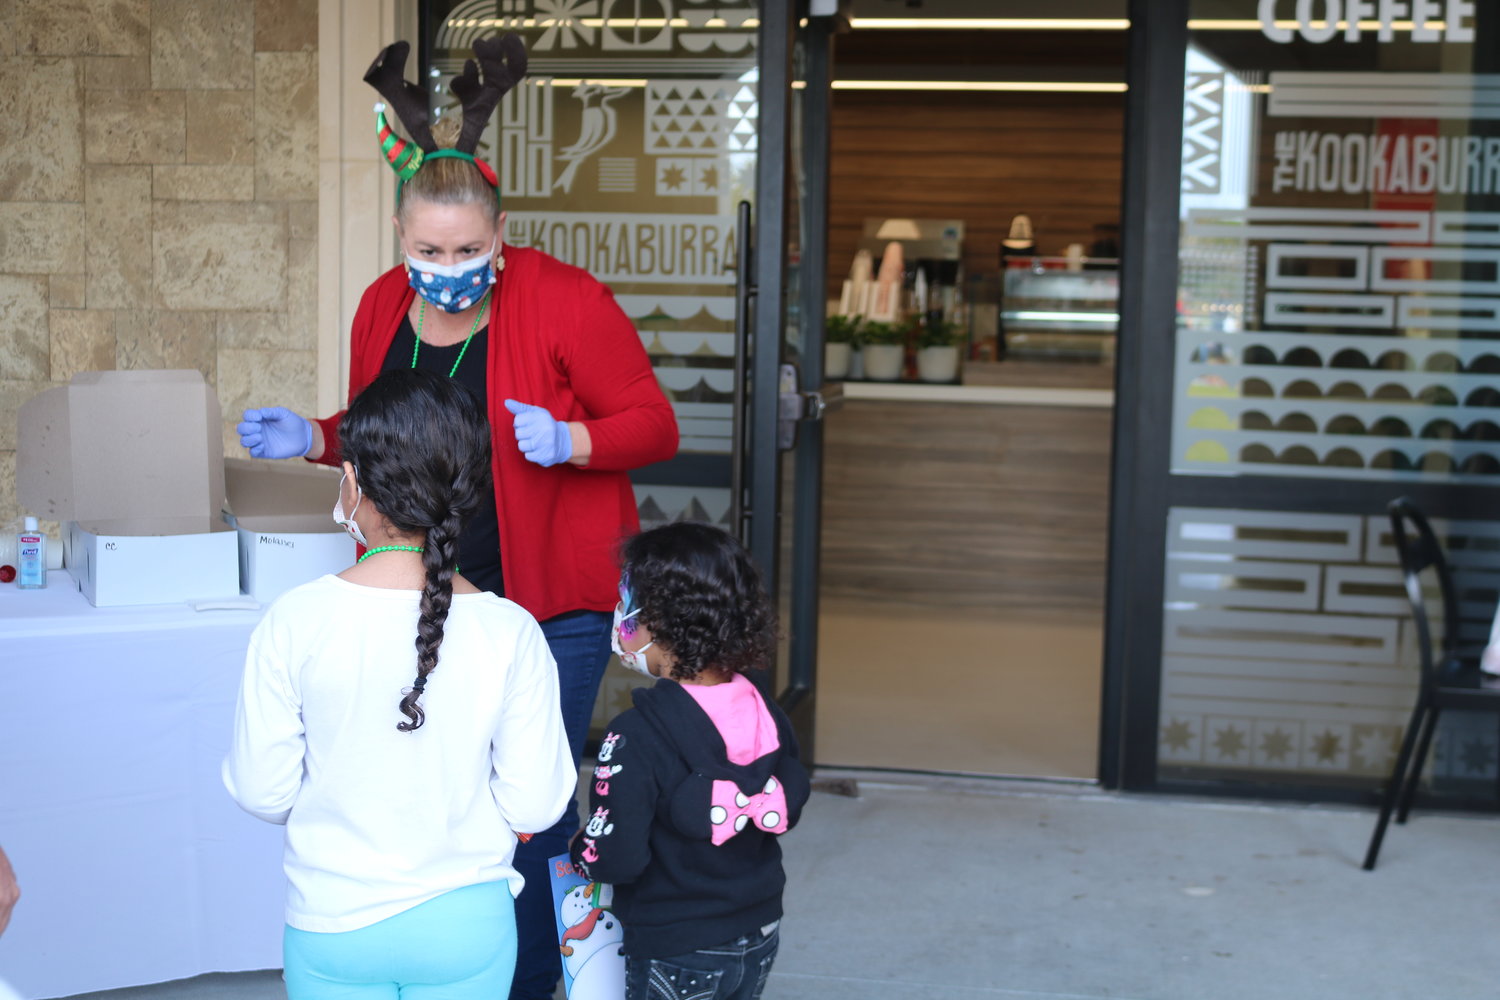 Children wait in line for a cup of hot chocolate from Kookaburra Coffee.